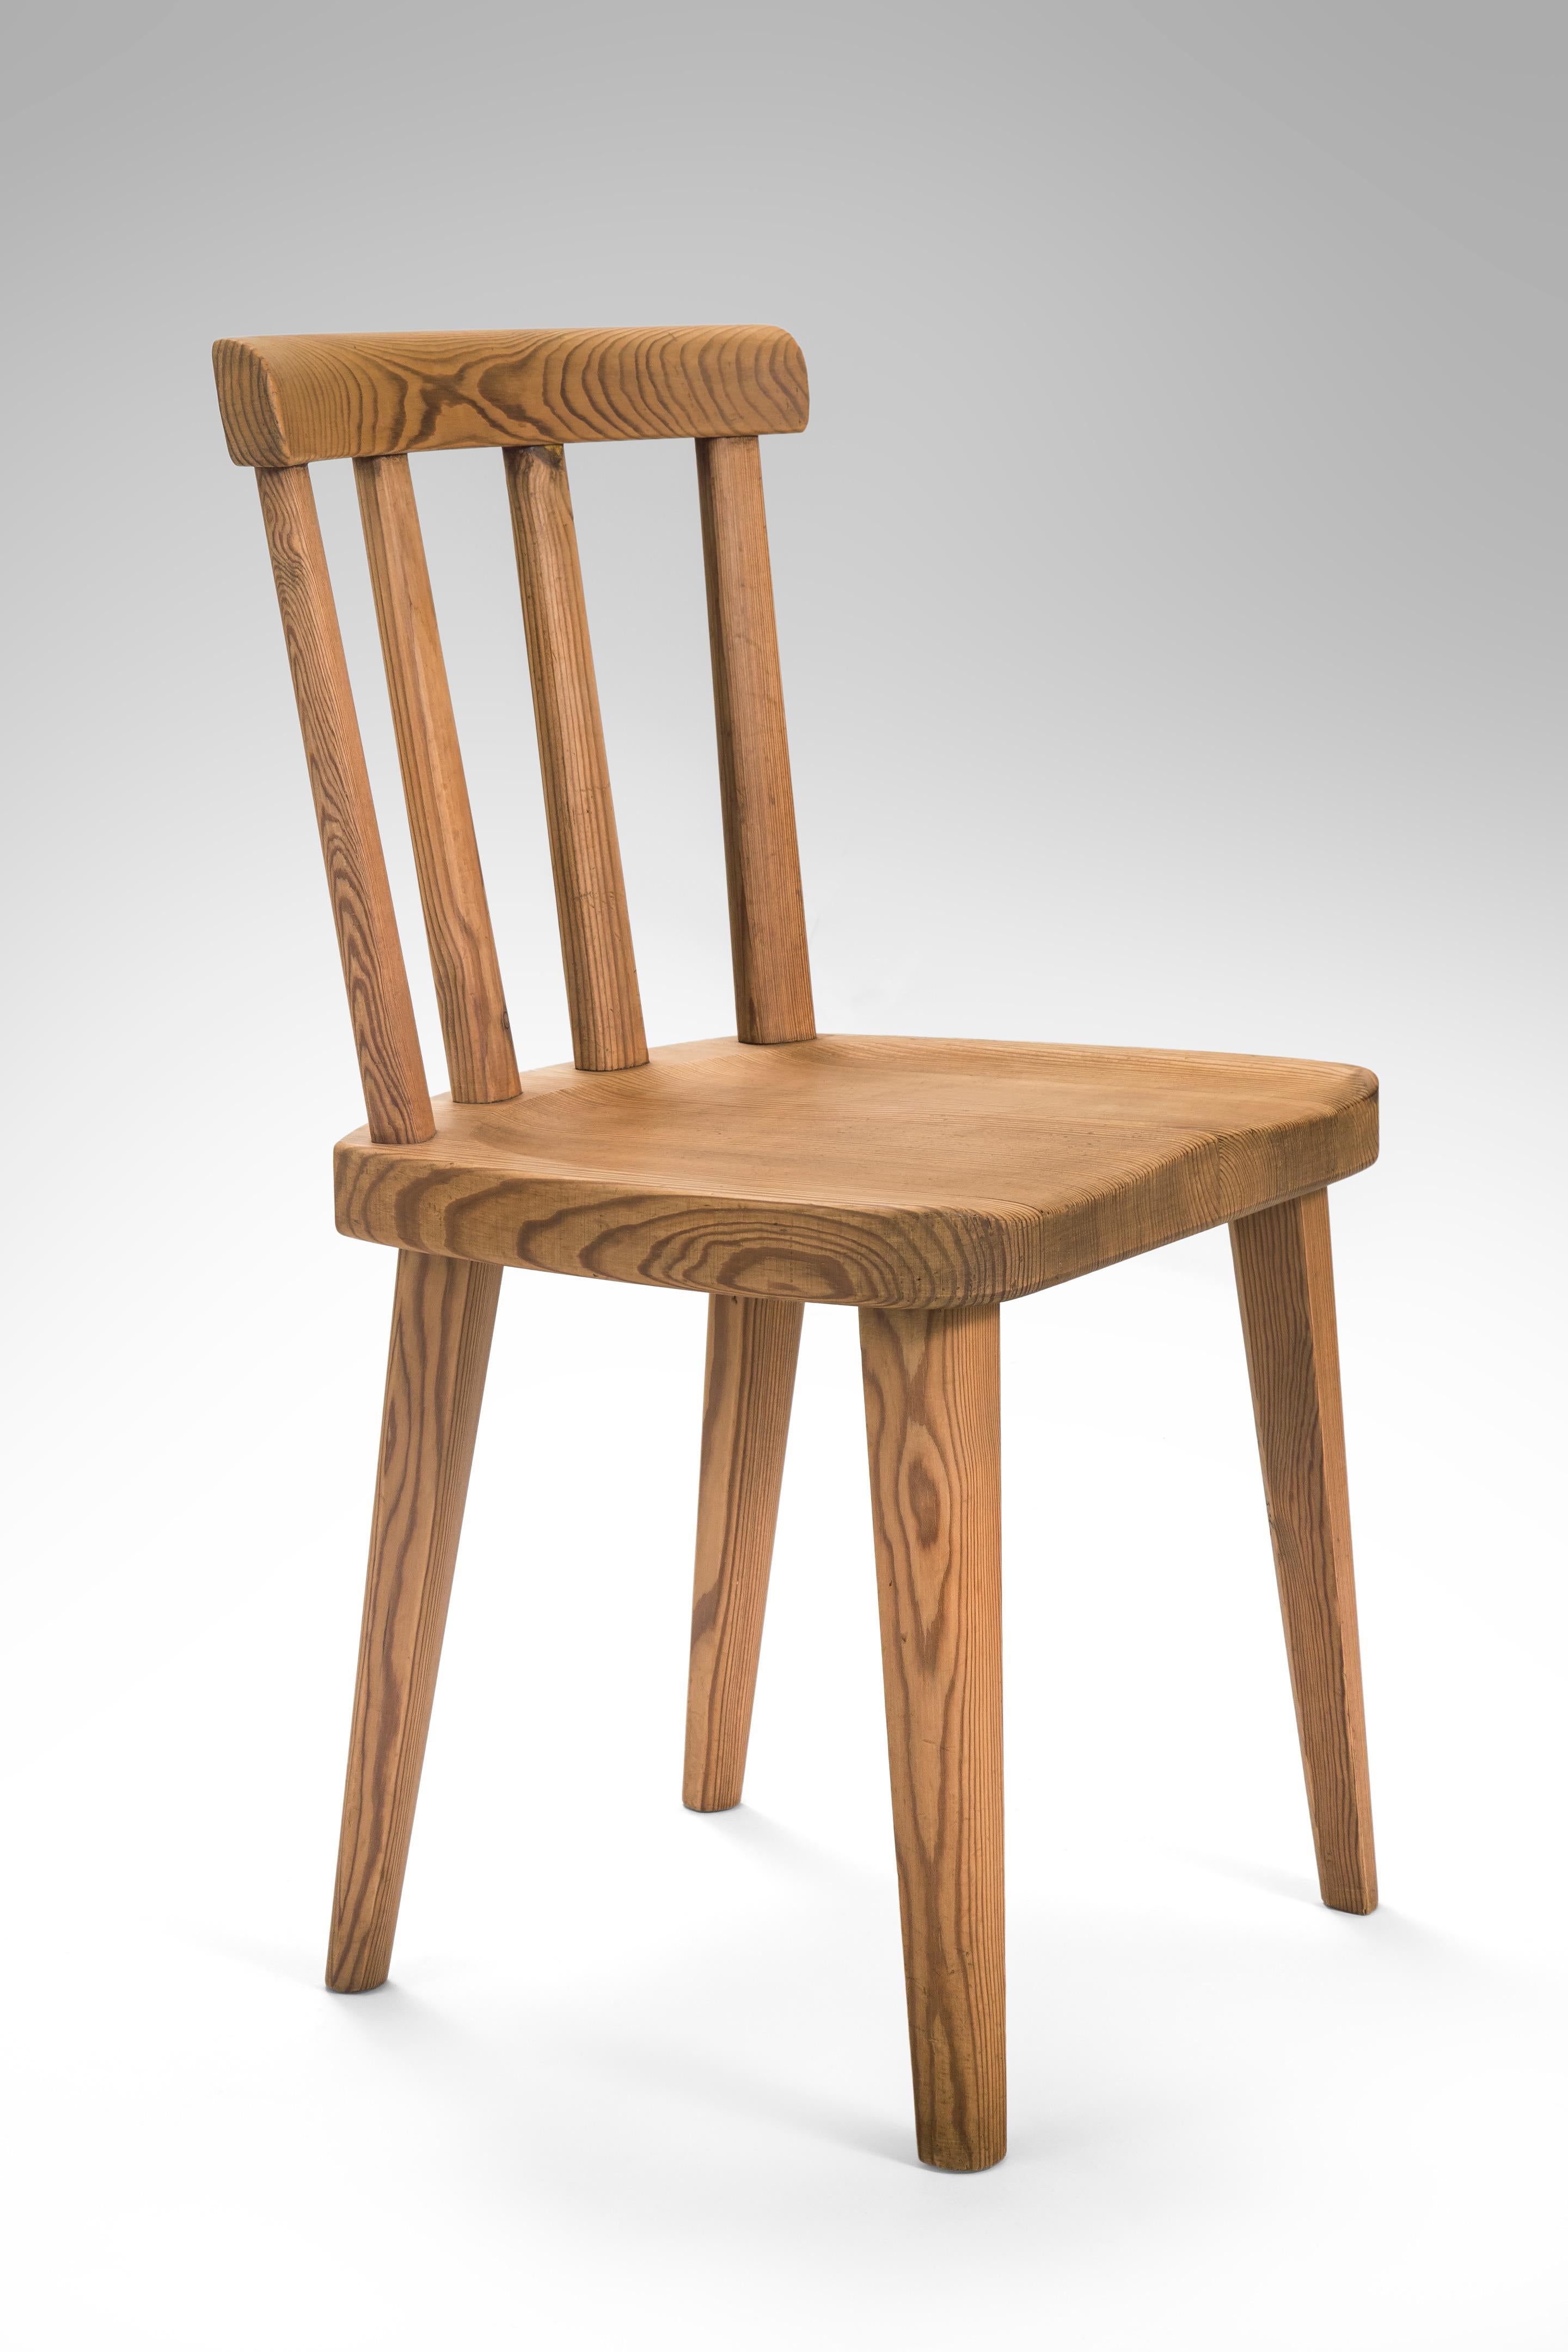 Axel Einar Hjorth, for Nordiska Kompaniet, set of six Solid Pine Utö chairs 
Early 20th century
A straight forward, comfortable and solidly constructed chair. The concave top rail raised on four rounded back splats, above a contoured seat,